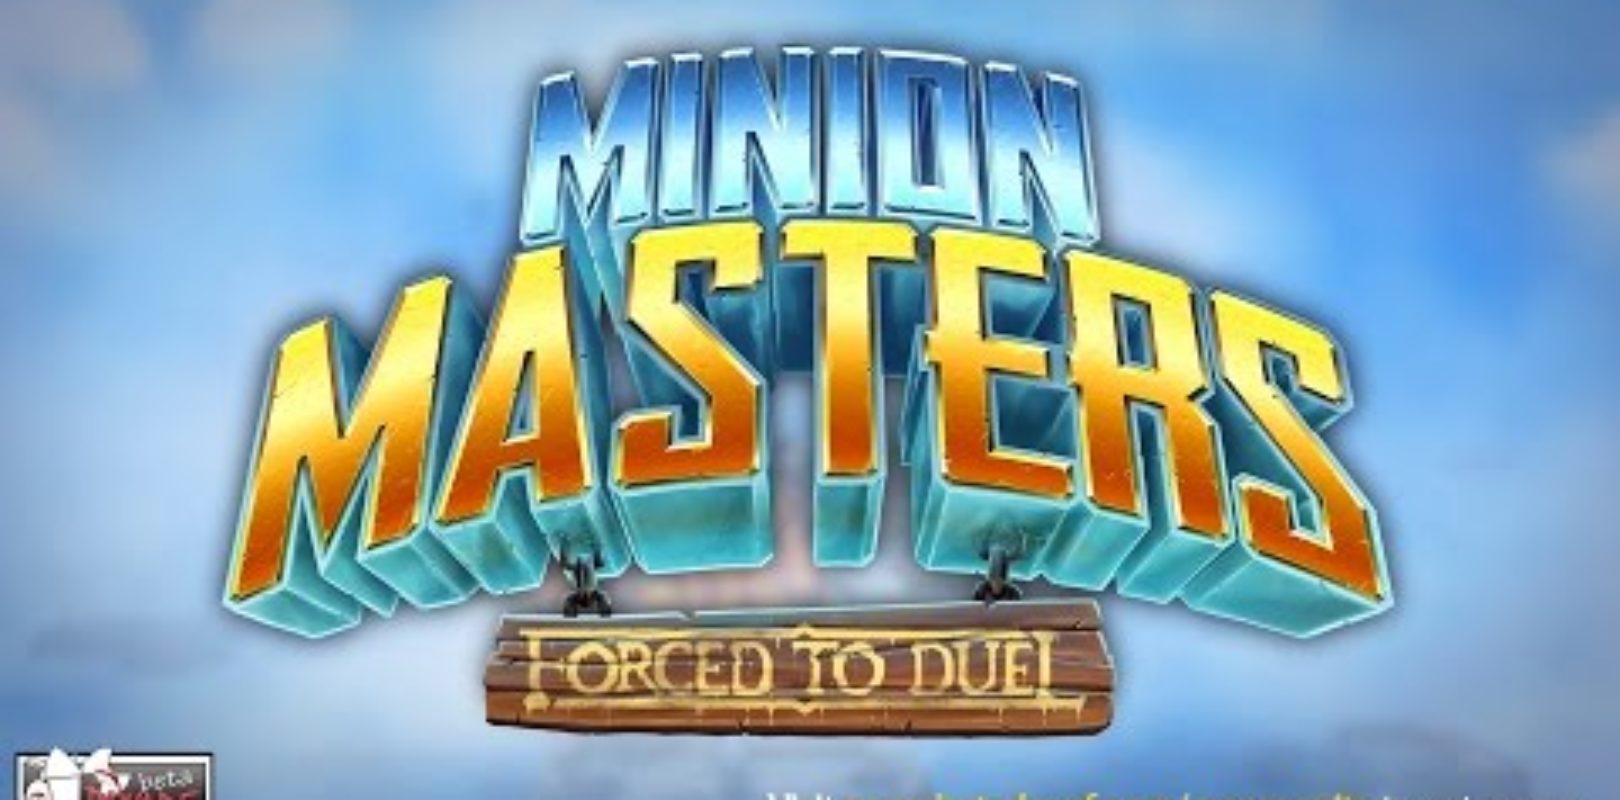 minion masters android